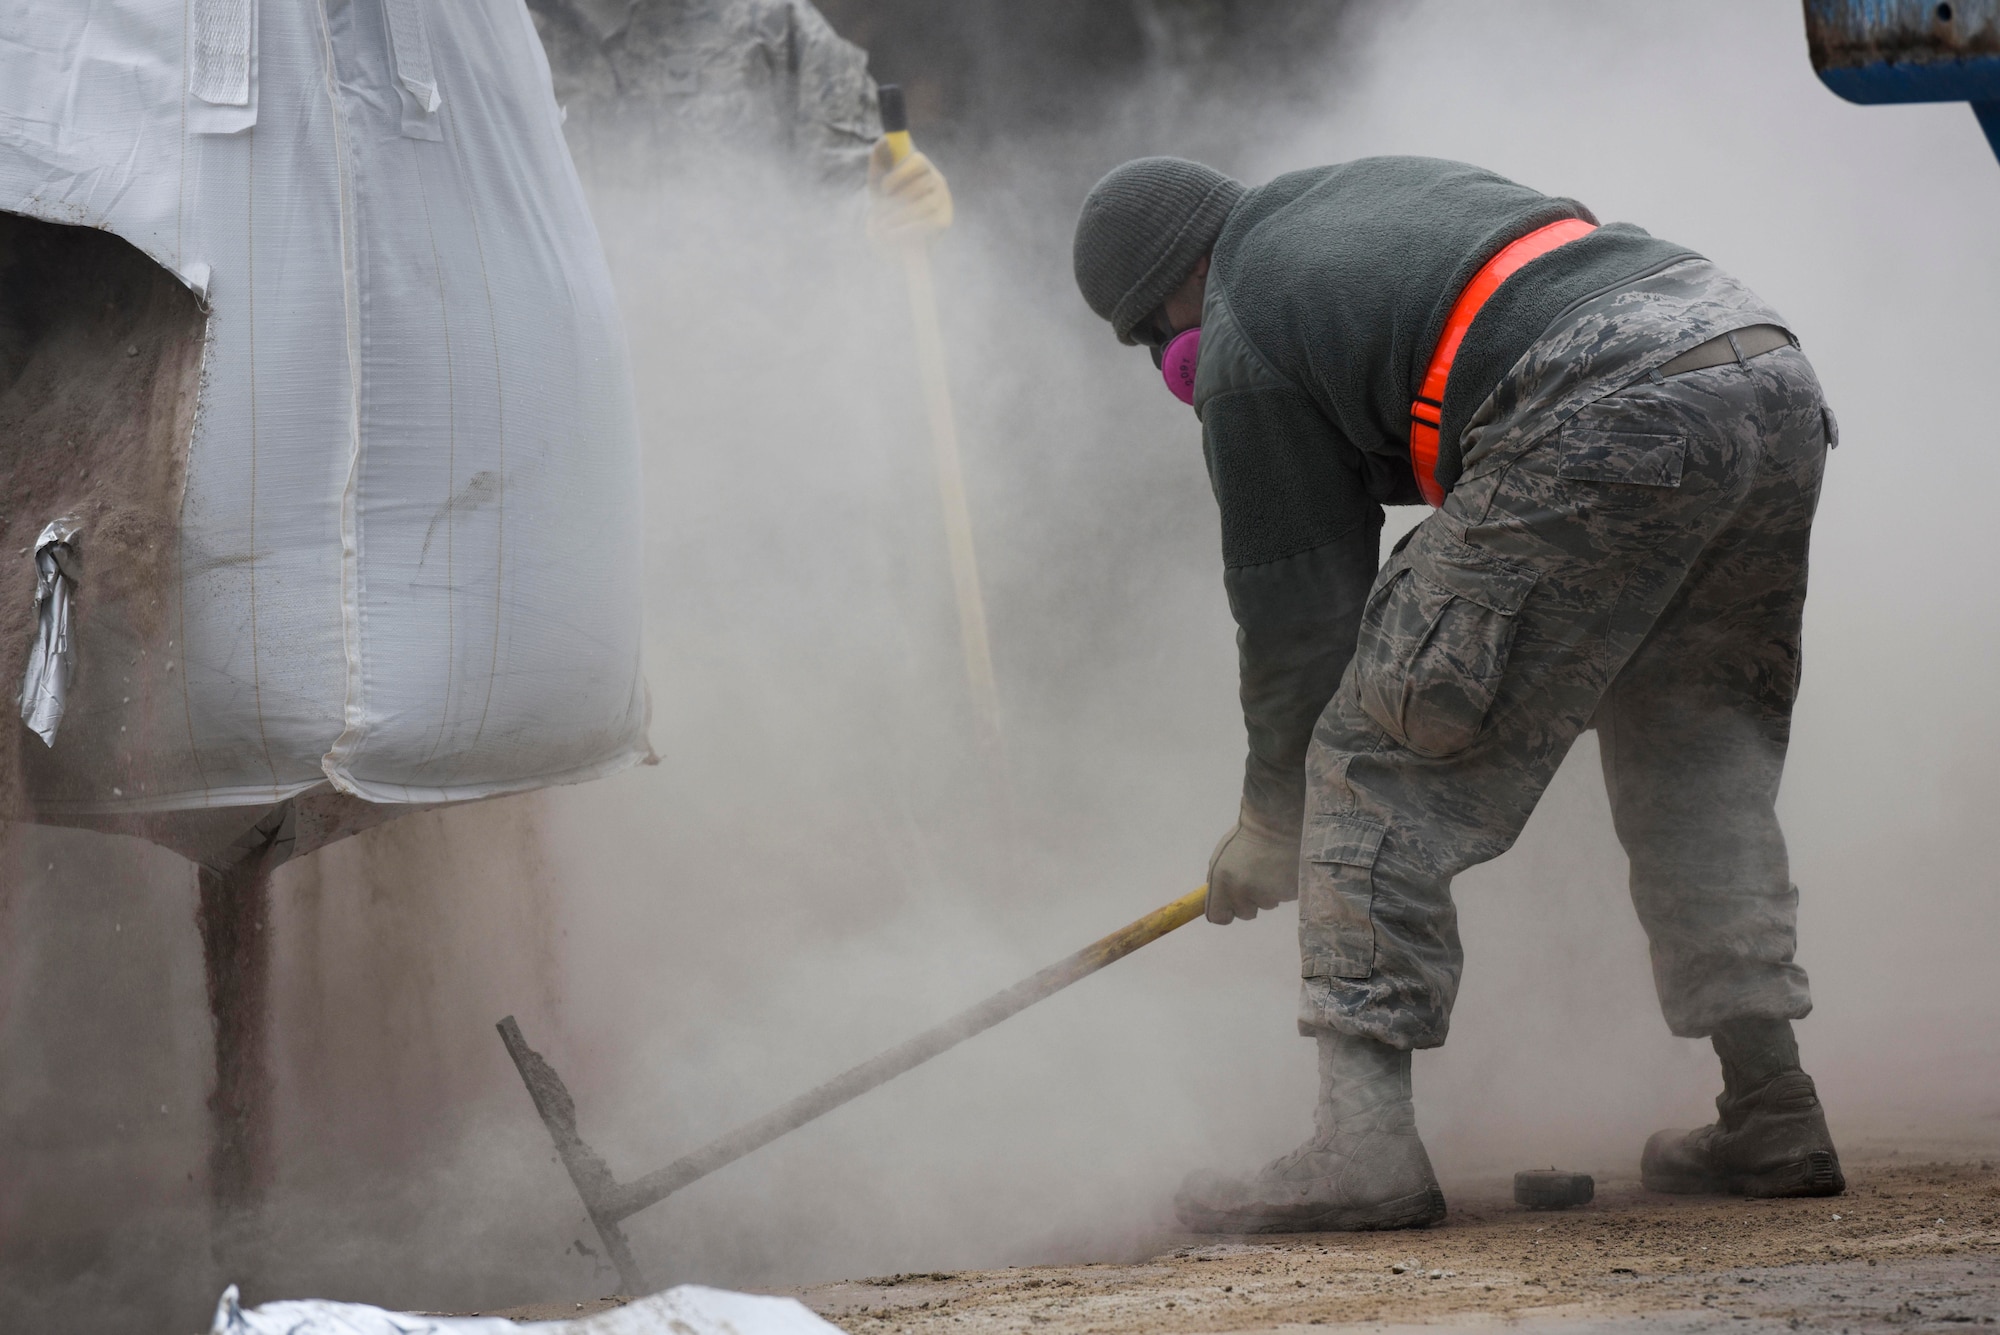 U.S. Air Force Staff Sgt. Antonio O’Campo, 773rd Civil Engineer Squadron electrical systems journeyman, mixes flowable fill concrete for a Rapid Airfield Damage Repair training exercise on Ramstein Air Base, Germany, Jan. 25, 2018. O’Campo was a part of the first class to be trained in the update RADR course. (U.S. Air Force photo by Senior Airman Devin M. Rumbaugh)